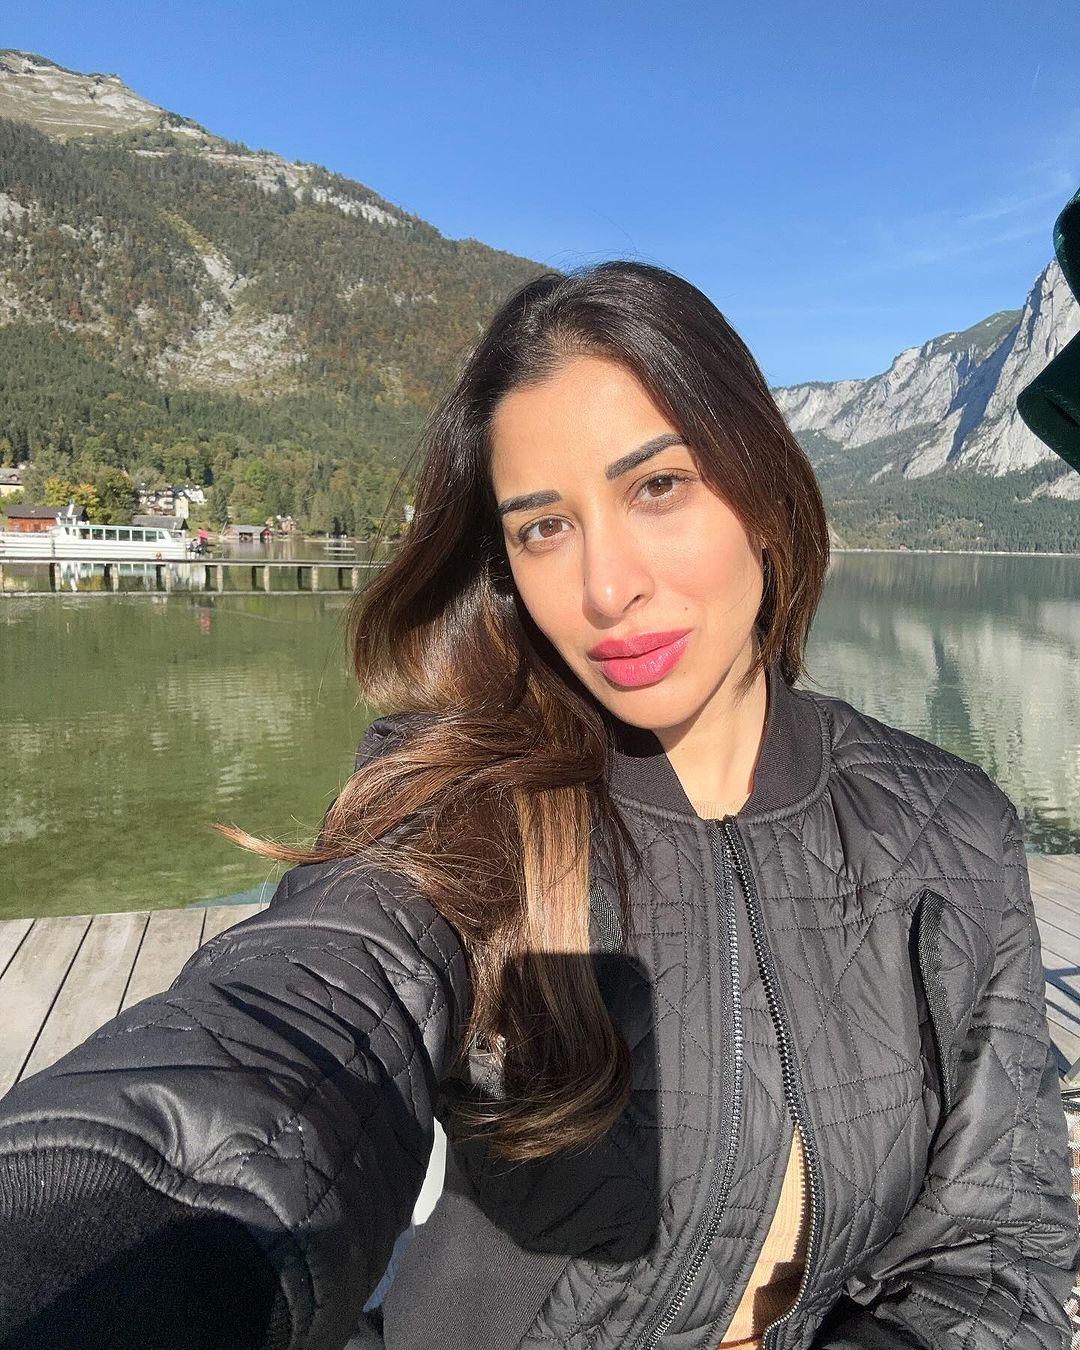 When nature, fresh air & natural light are your filters💙 #nofilterneeded #missingthemountains #sundayvibes

#naturallight #naturalbeauty #mothernature #winterfeels #altausse #mayrlife #sophiechoudry #gratitude #mountains